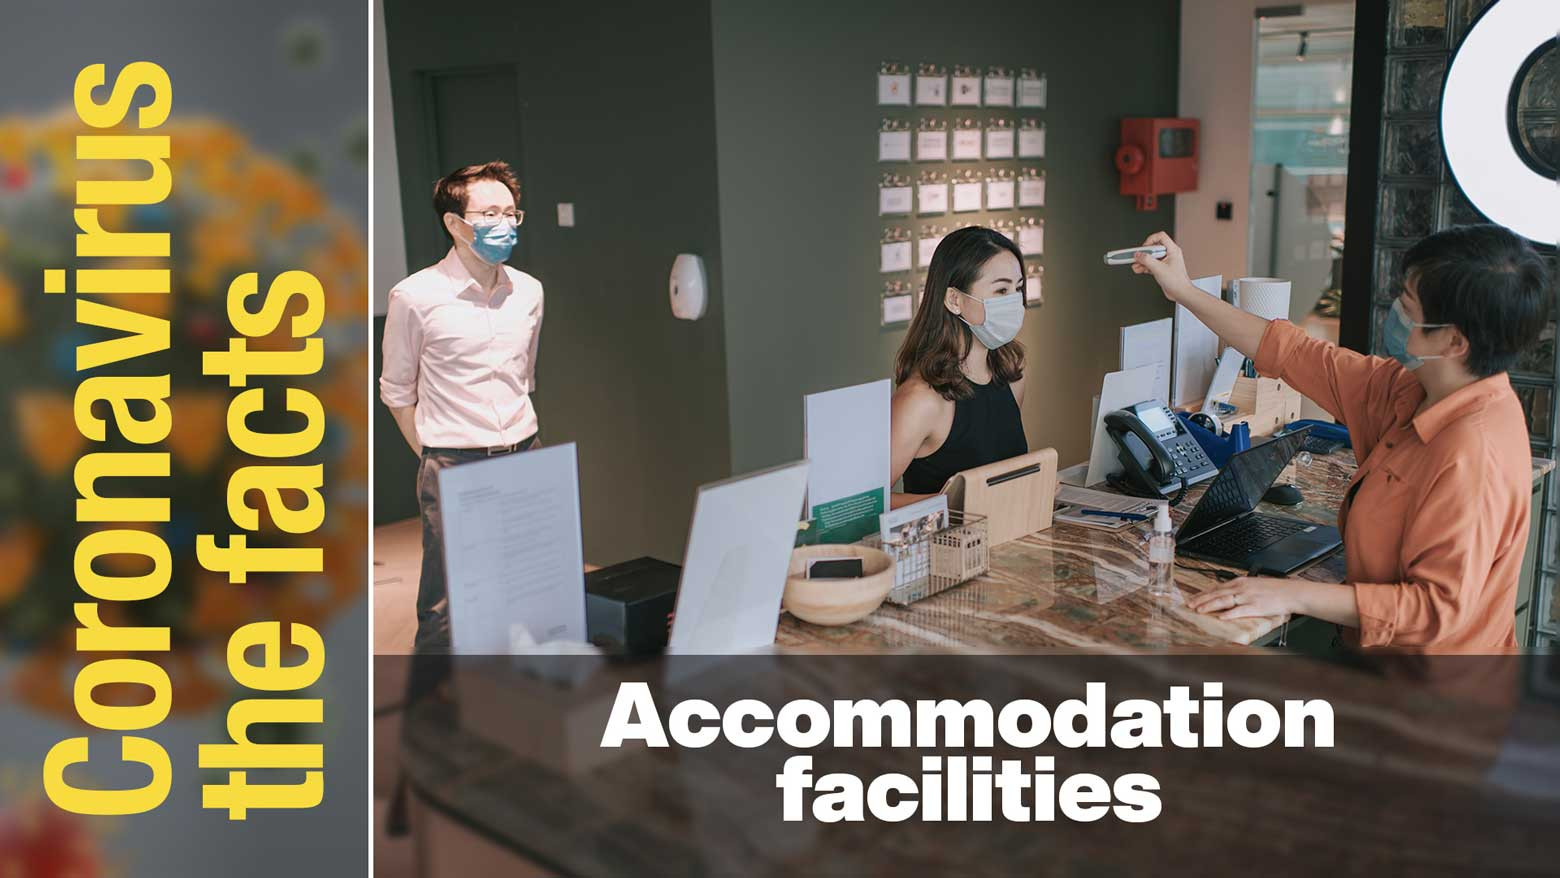 Guidelines for accommodation facilities